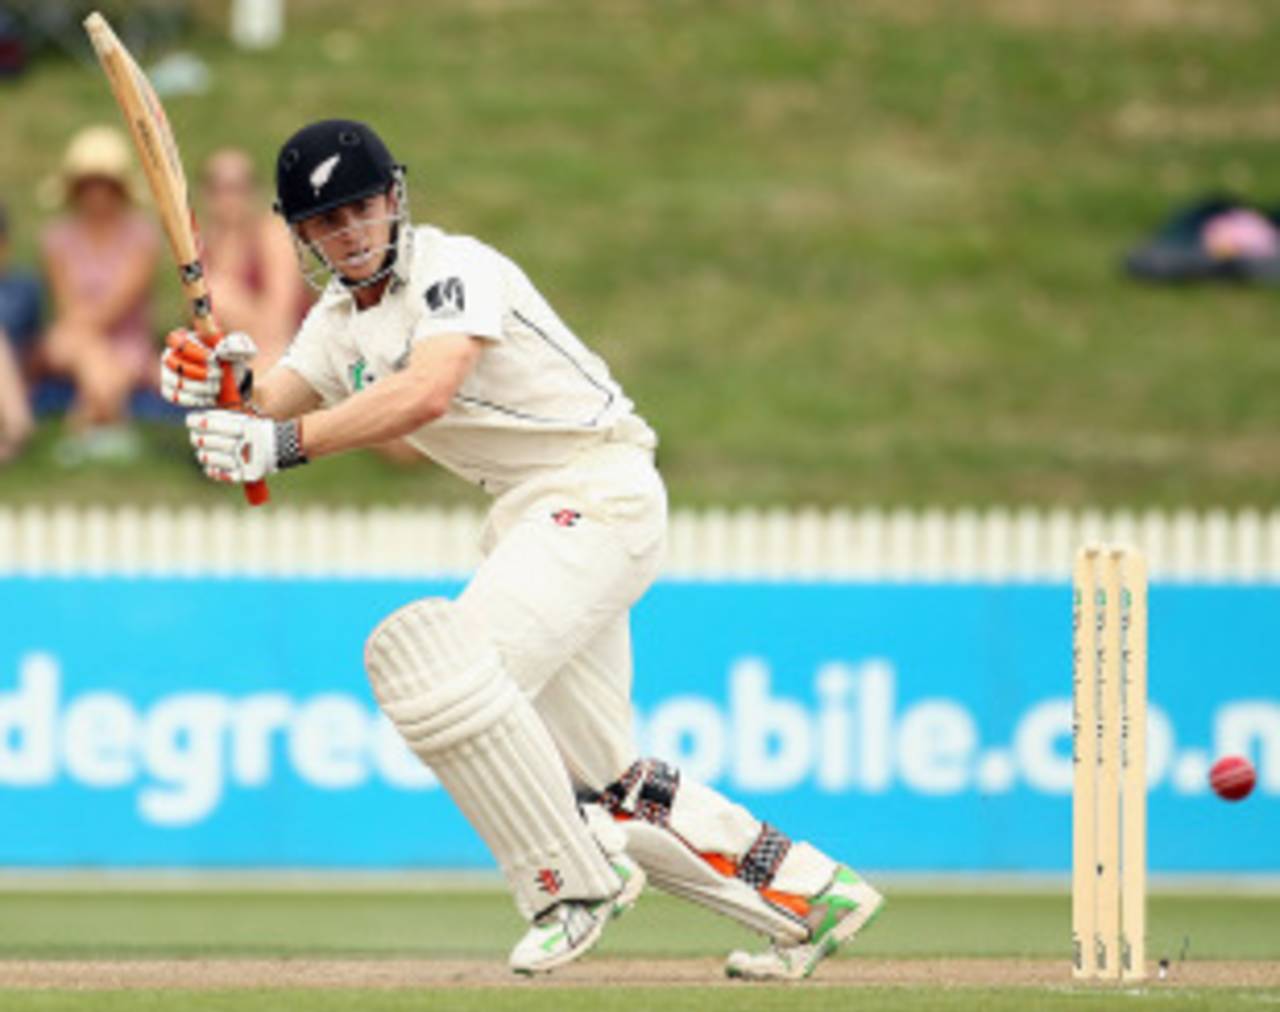 Kane Williamson was unbeaten on 44 at the end of the day's play, New Zealand v Pakistan, 1st Test, Hamilton, 1st day, January 7, 2011